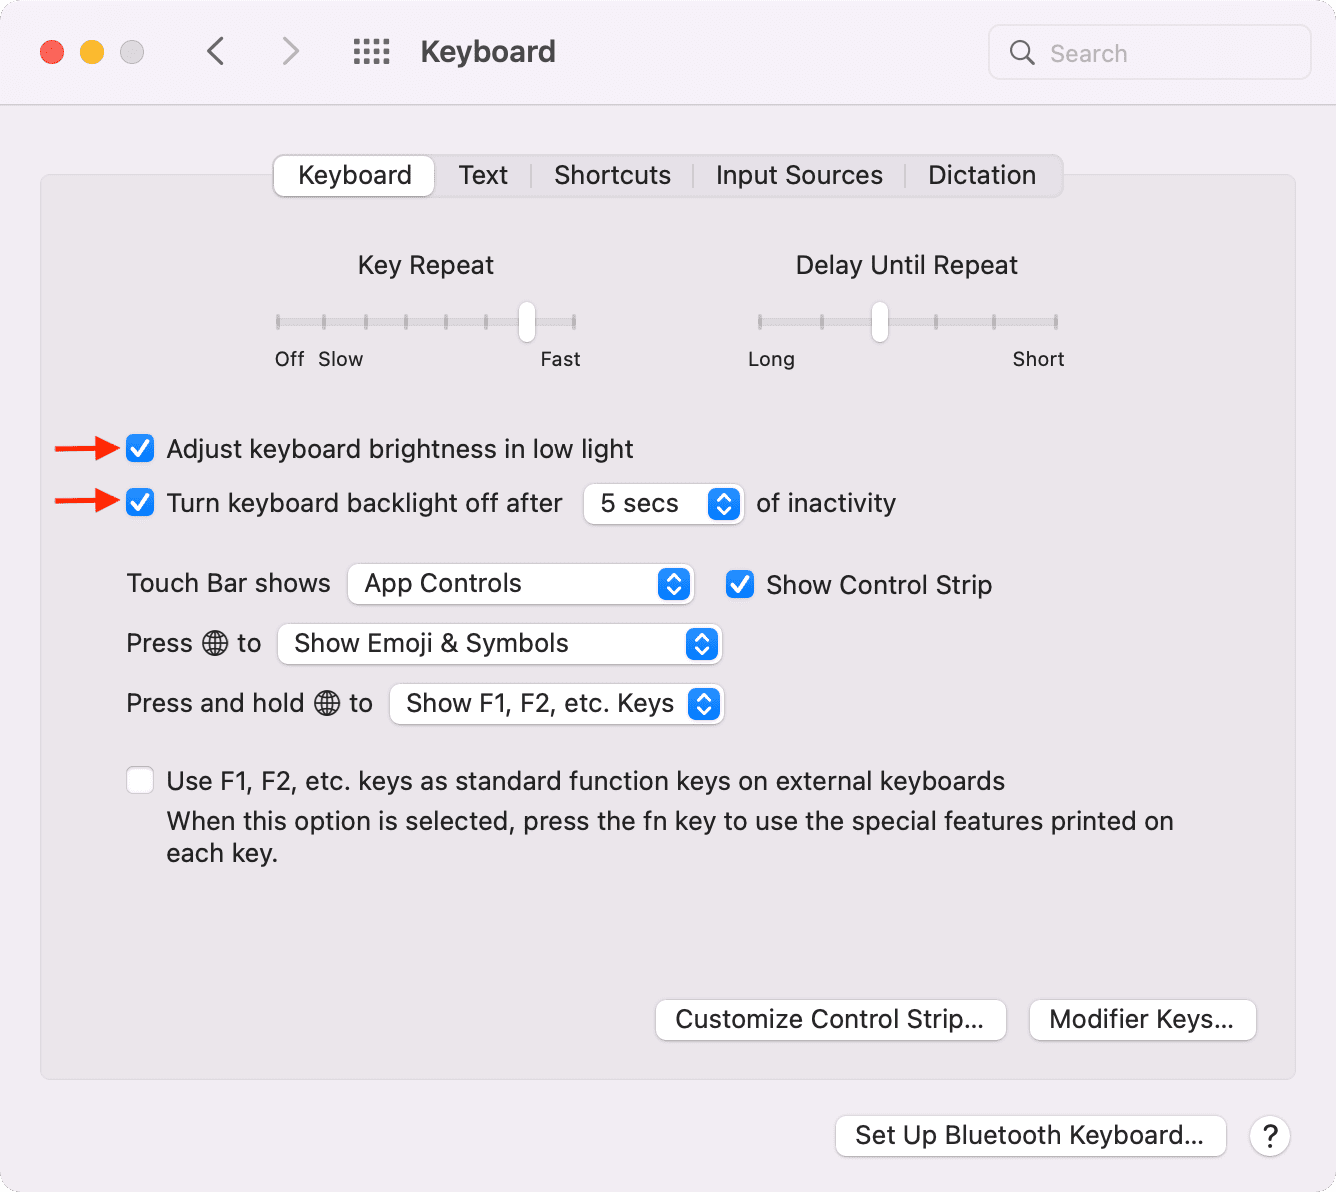 Keyboard preferences on MacBook to save battery